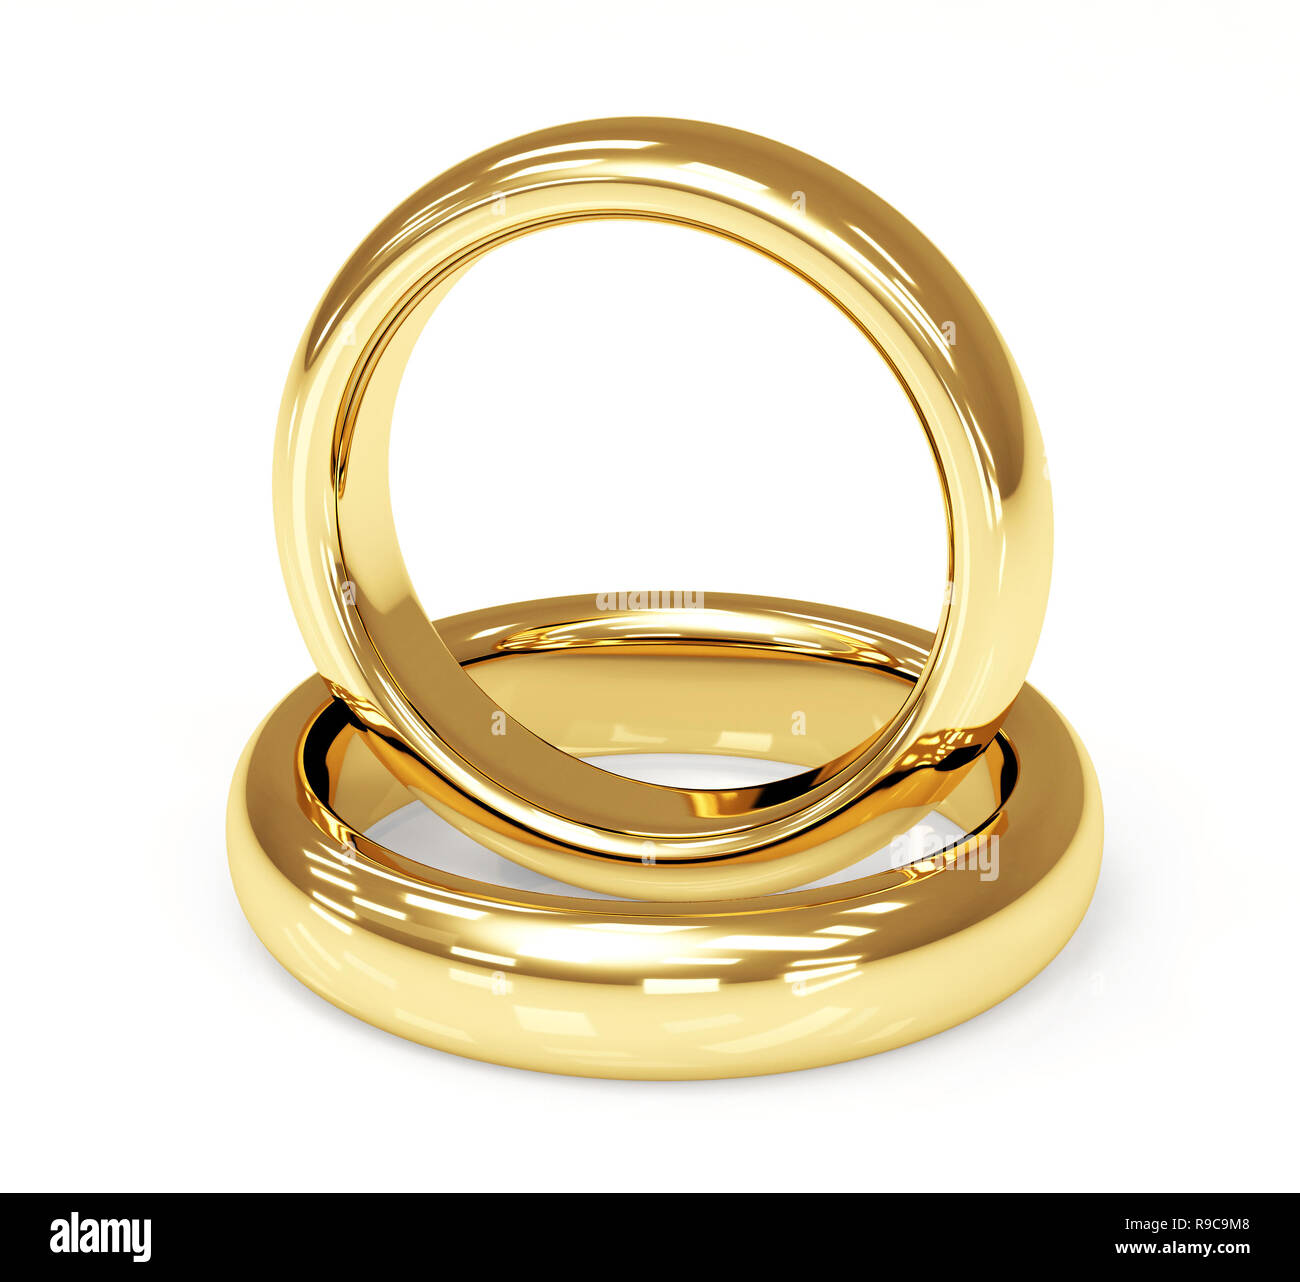 100+ Fantastic Inspiration and Ideas for 3D Printed Gold Ring Designs |